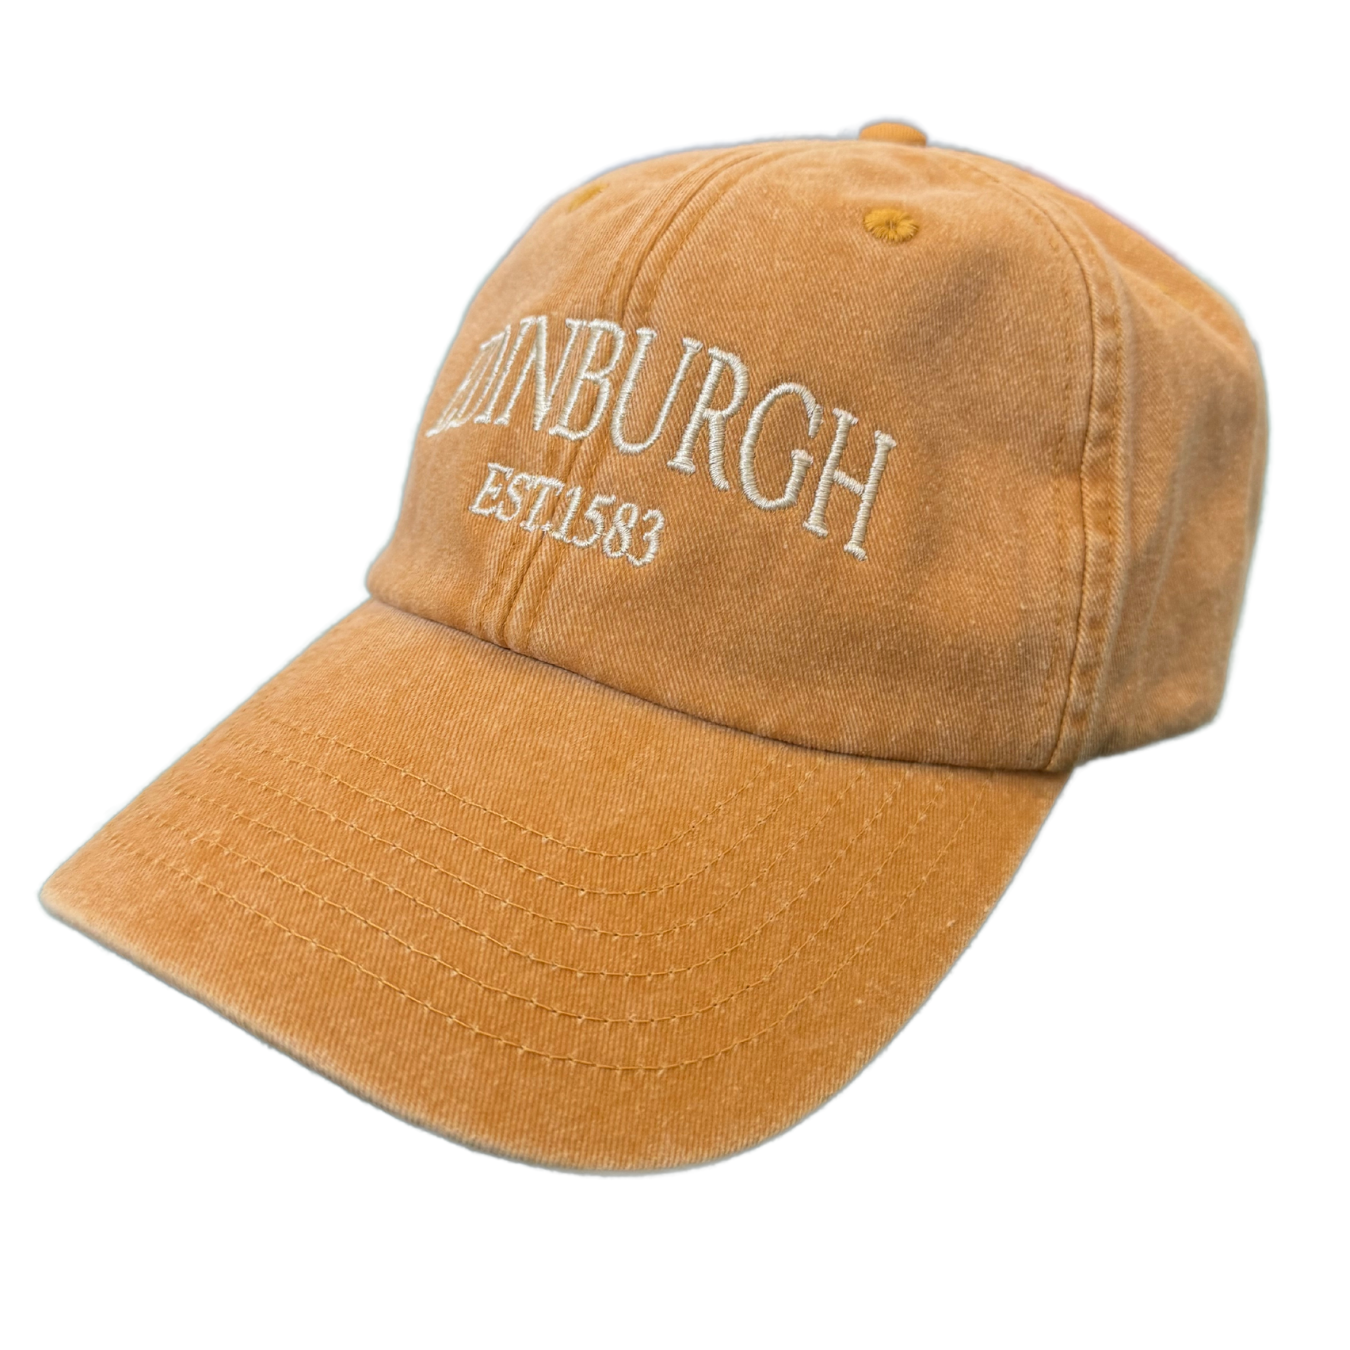 Vintage mustard yellow hat against a white background with 'Edinburgh EST. 1583' embroidered on the cap with an off white thread